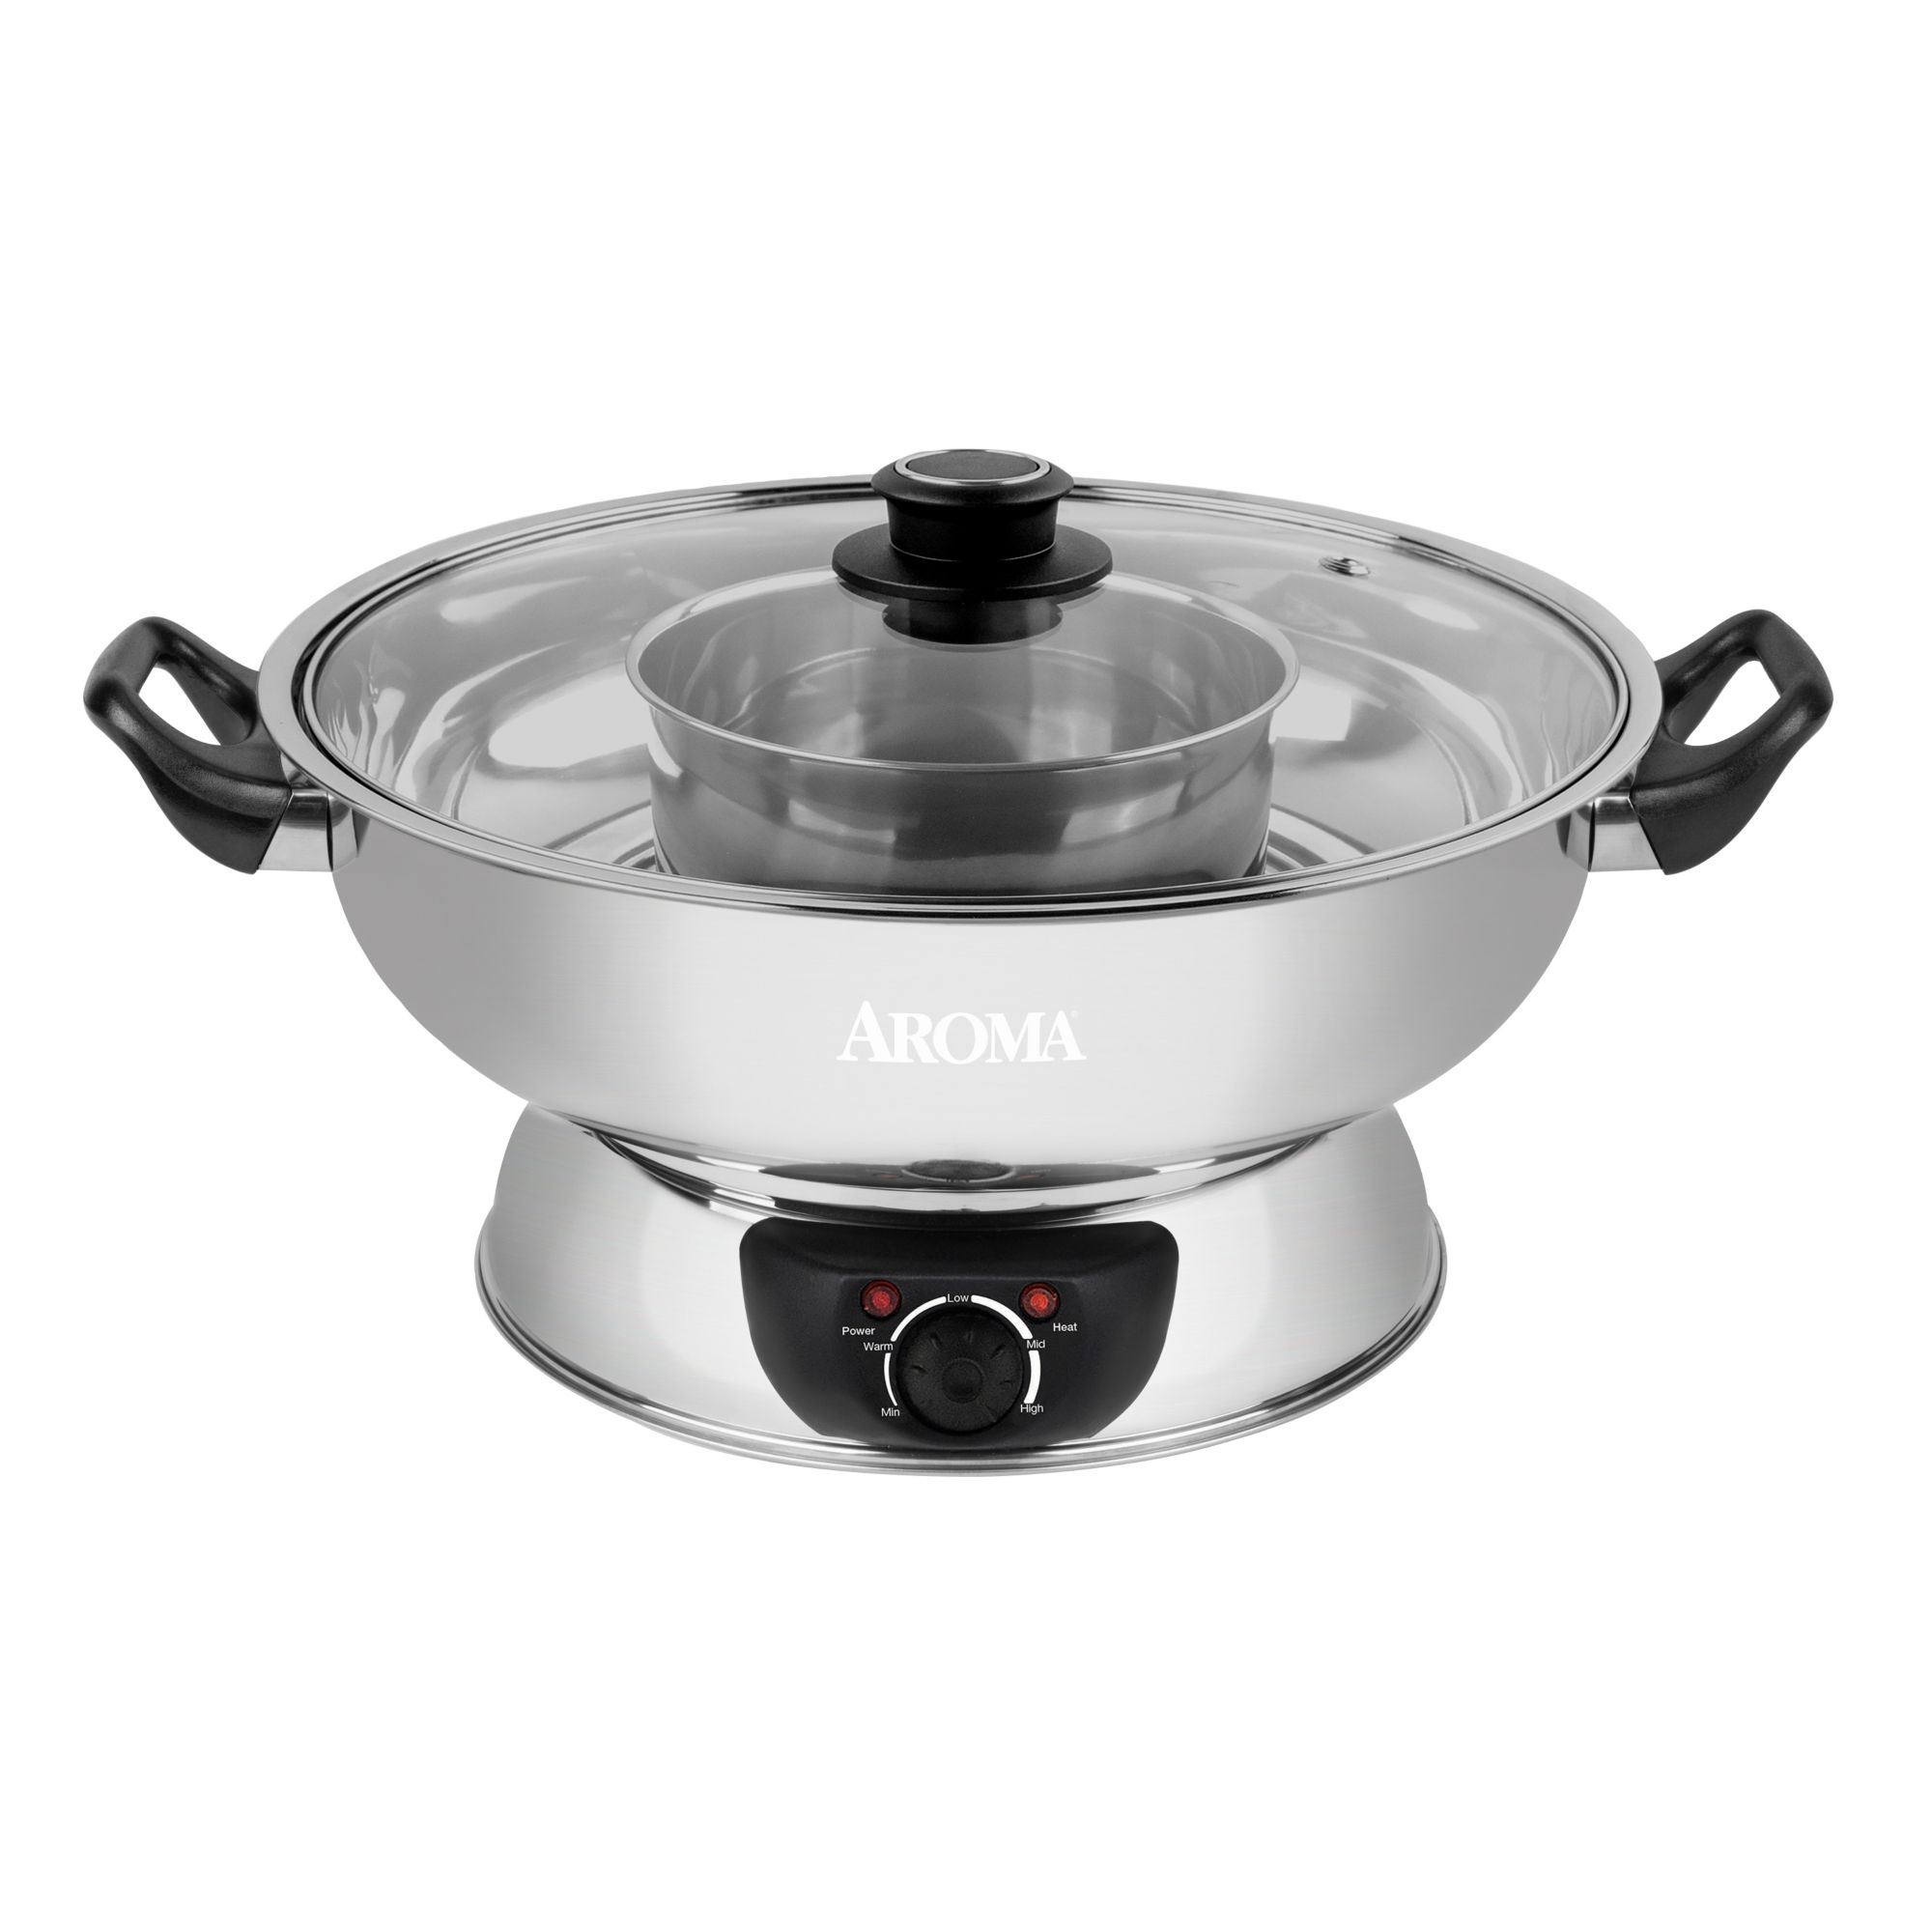 Aroma Stainless Steel Dual-Sided Electric Hot Pot 5Qt ASP-610 1 count